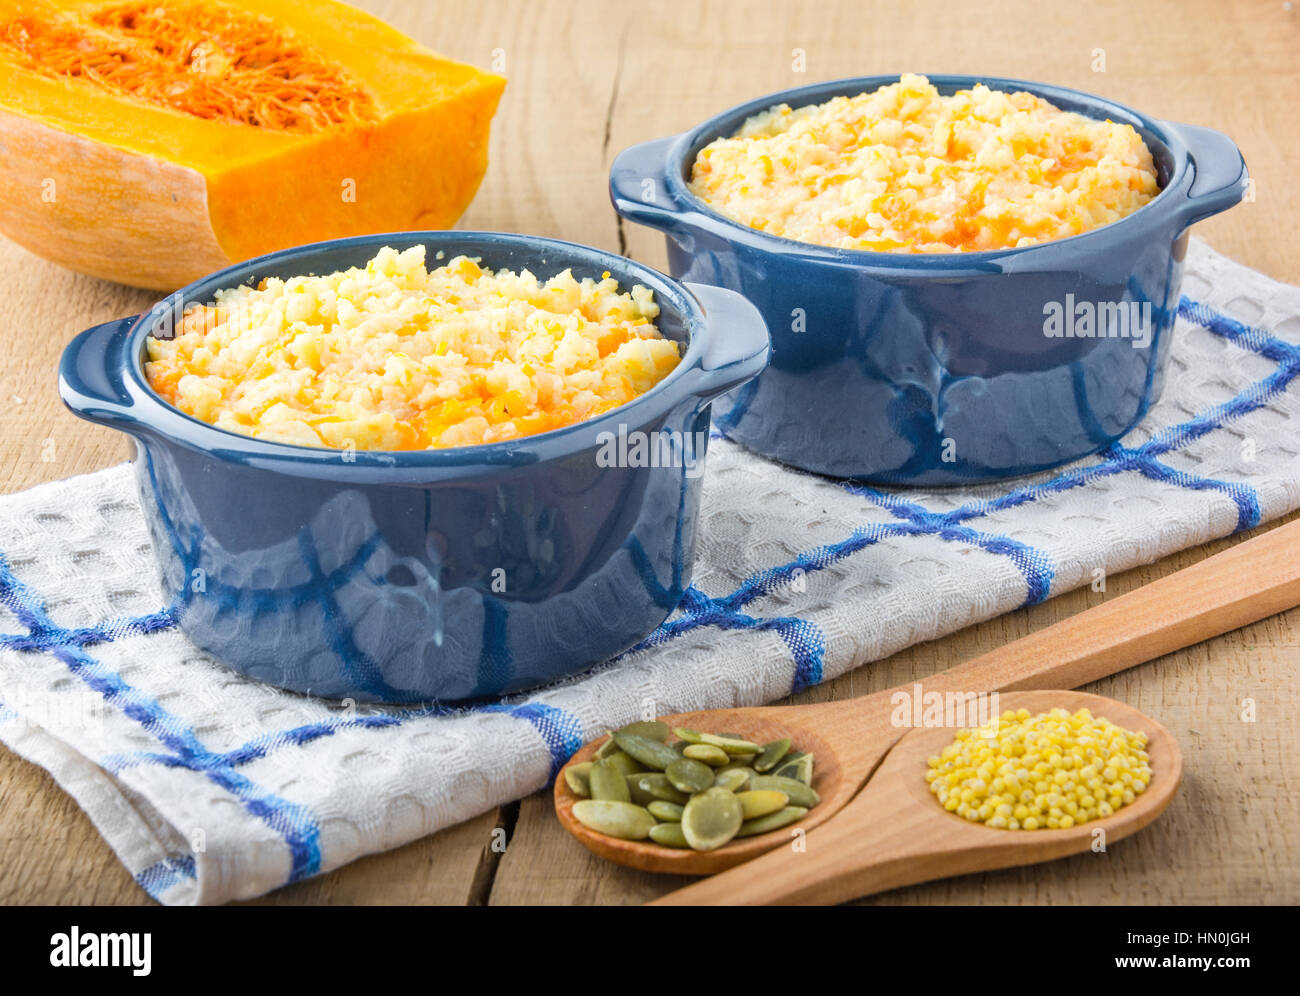 millet porridge with pumpkin in blue bowl on a kitchen towel, pumpkin seeds and millet in a wooden spoon and pumpkin on a wooden table Stock Photo